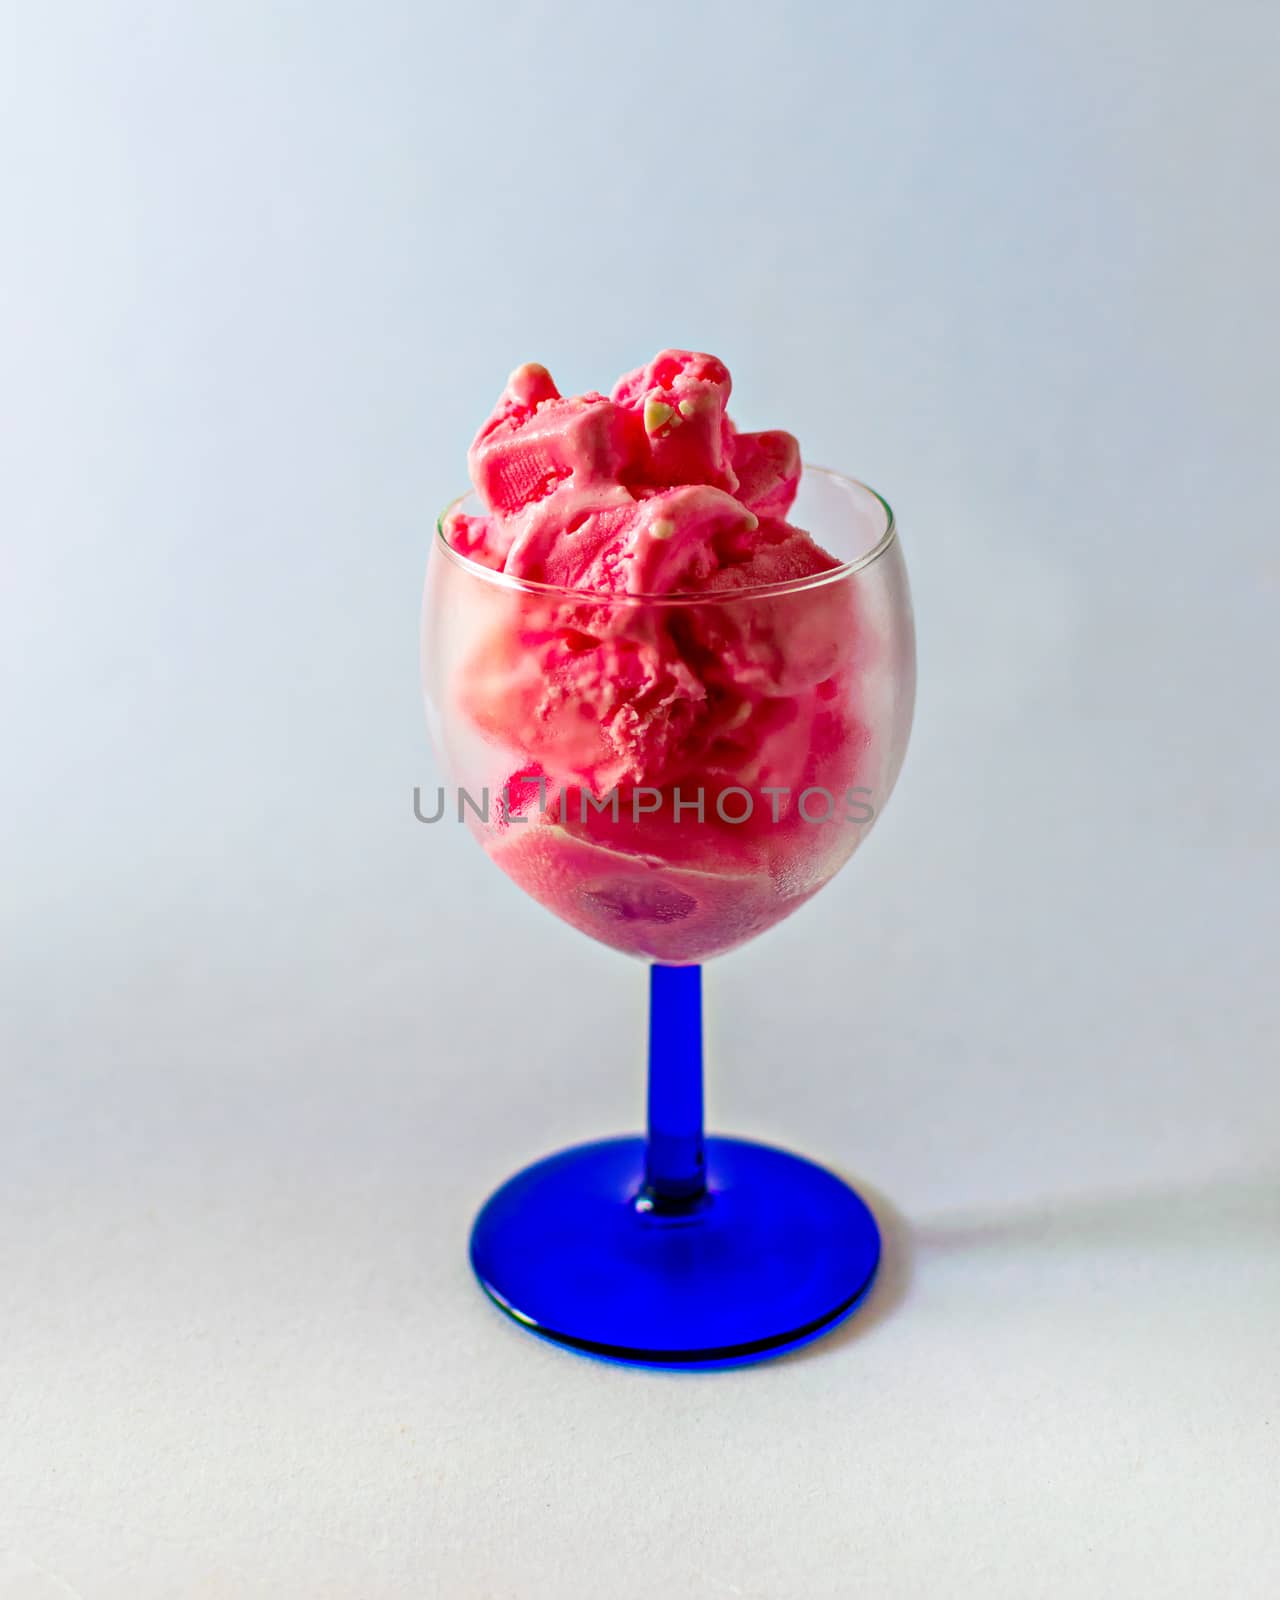 Delicious, pink strawberry ice-cream in a tranparent wine glass. by lalam